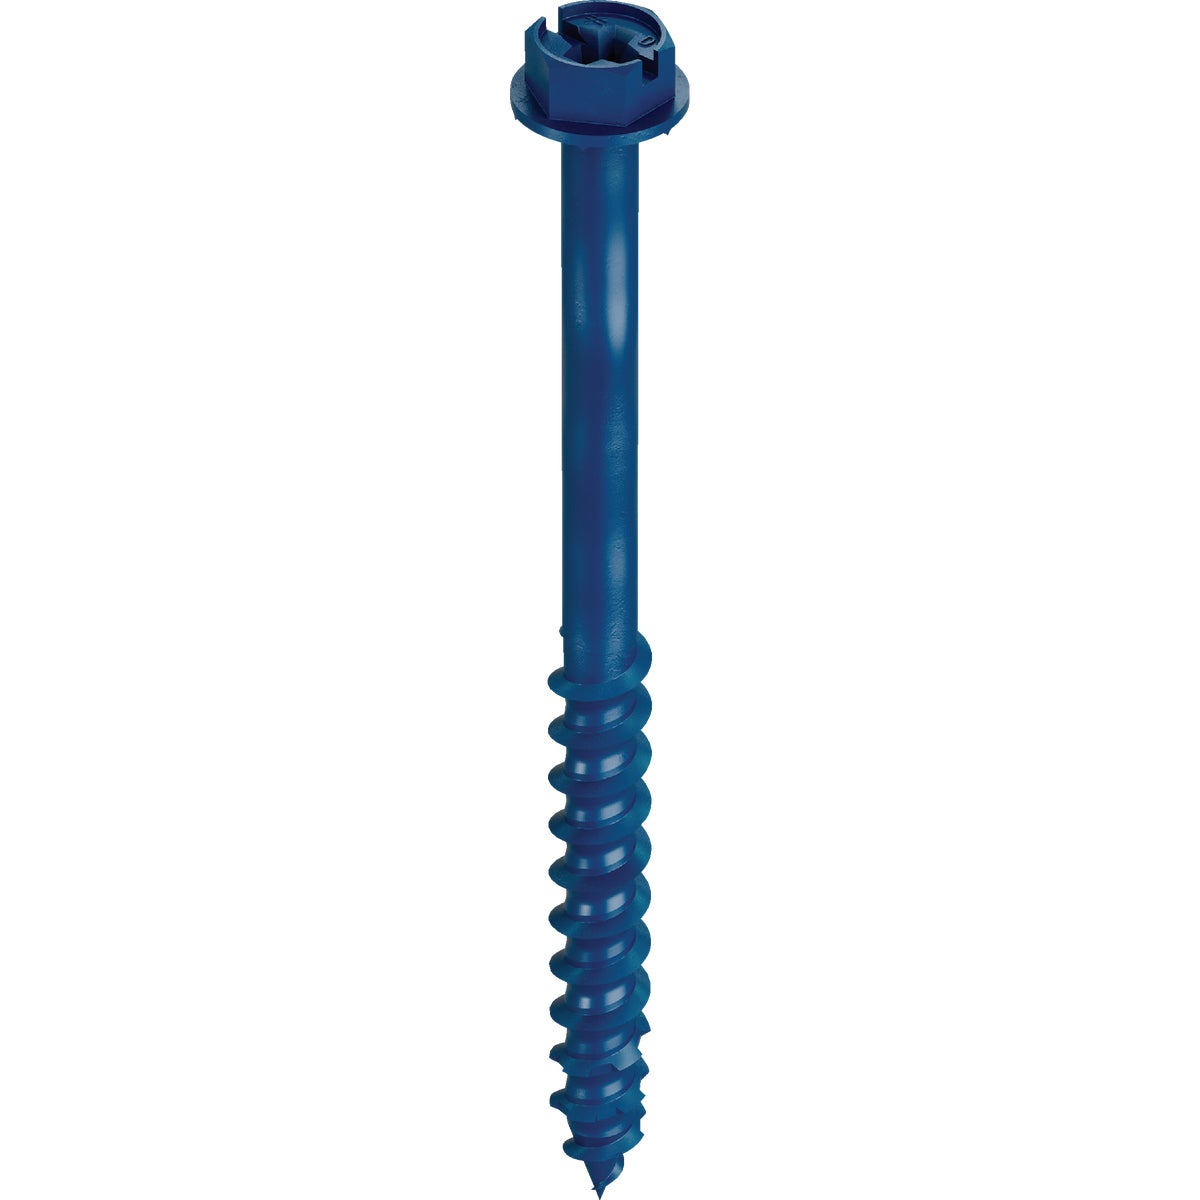 Simpson Strong-Tie Titen Turbo  1/4 in. x 3-1/4 in. Hex-Head Concrete and Masonry Screw, Blue (75-Qty)